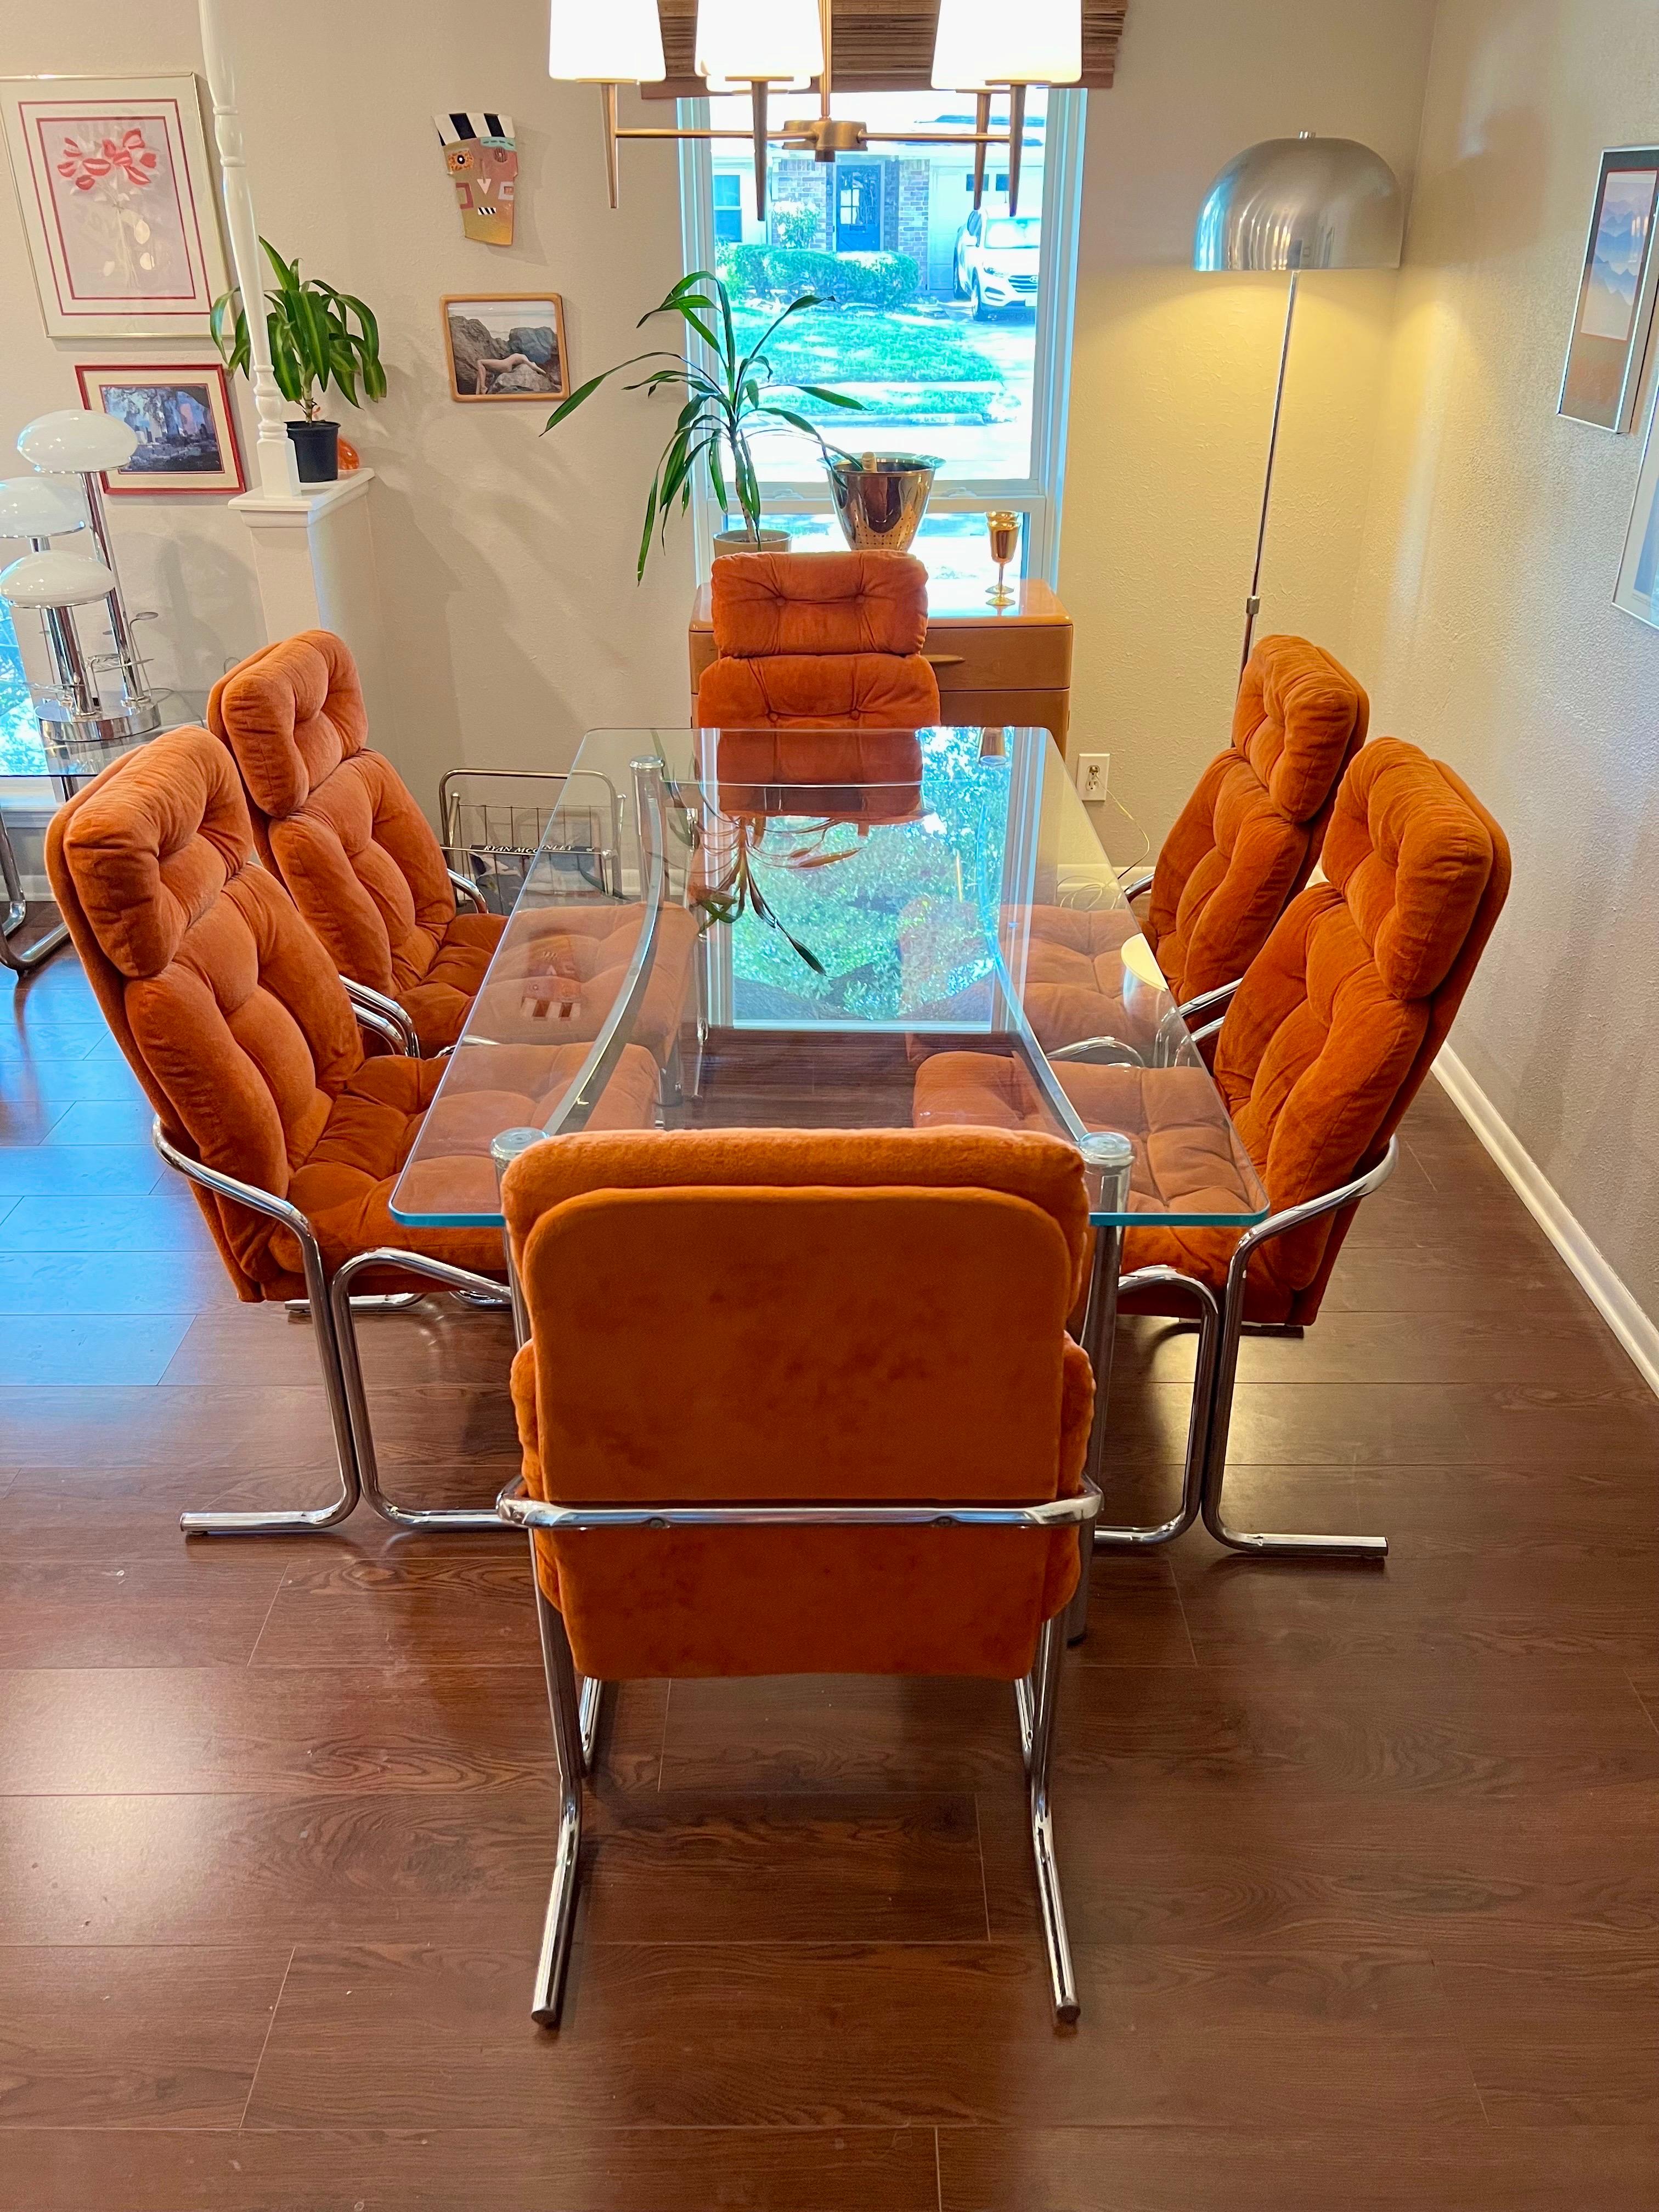 Stunning cutting edge Mid-Century Modern dining set. In the manner of jerry Johnson. Includes a set of 6 chrome dining chairs with a matching dining table by Cal-Style Furniture Manufacturing, circa 1979. All original, in great vintage condition.